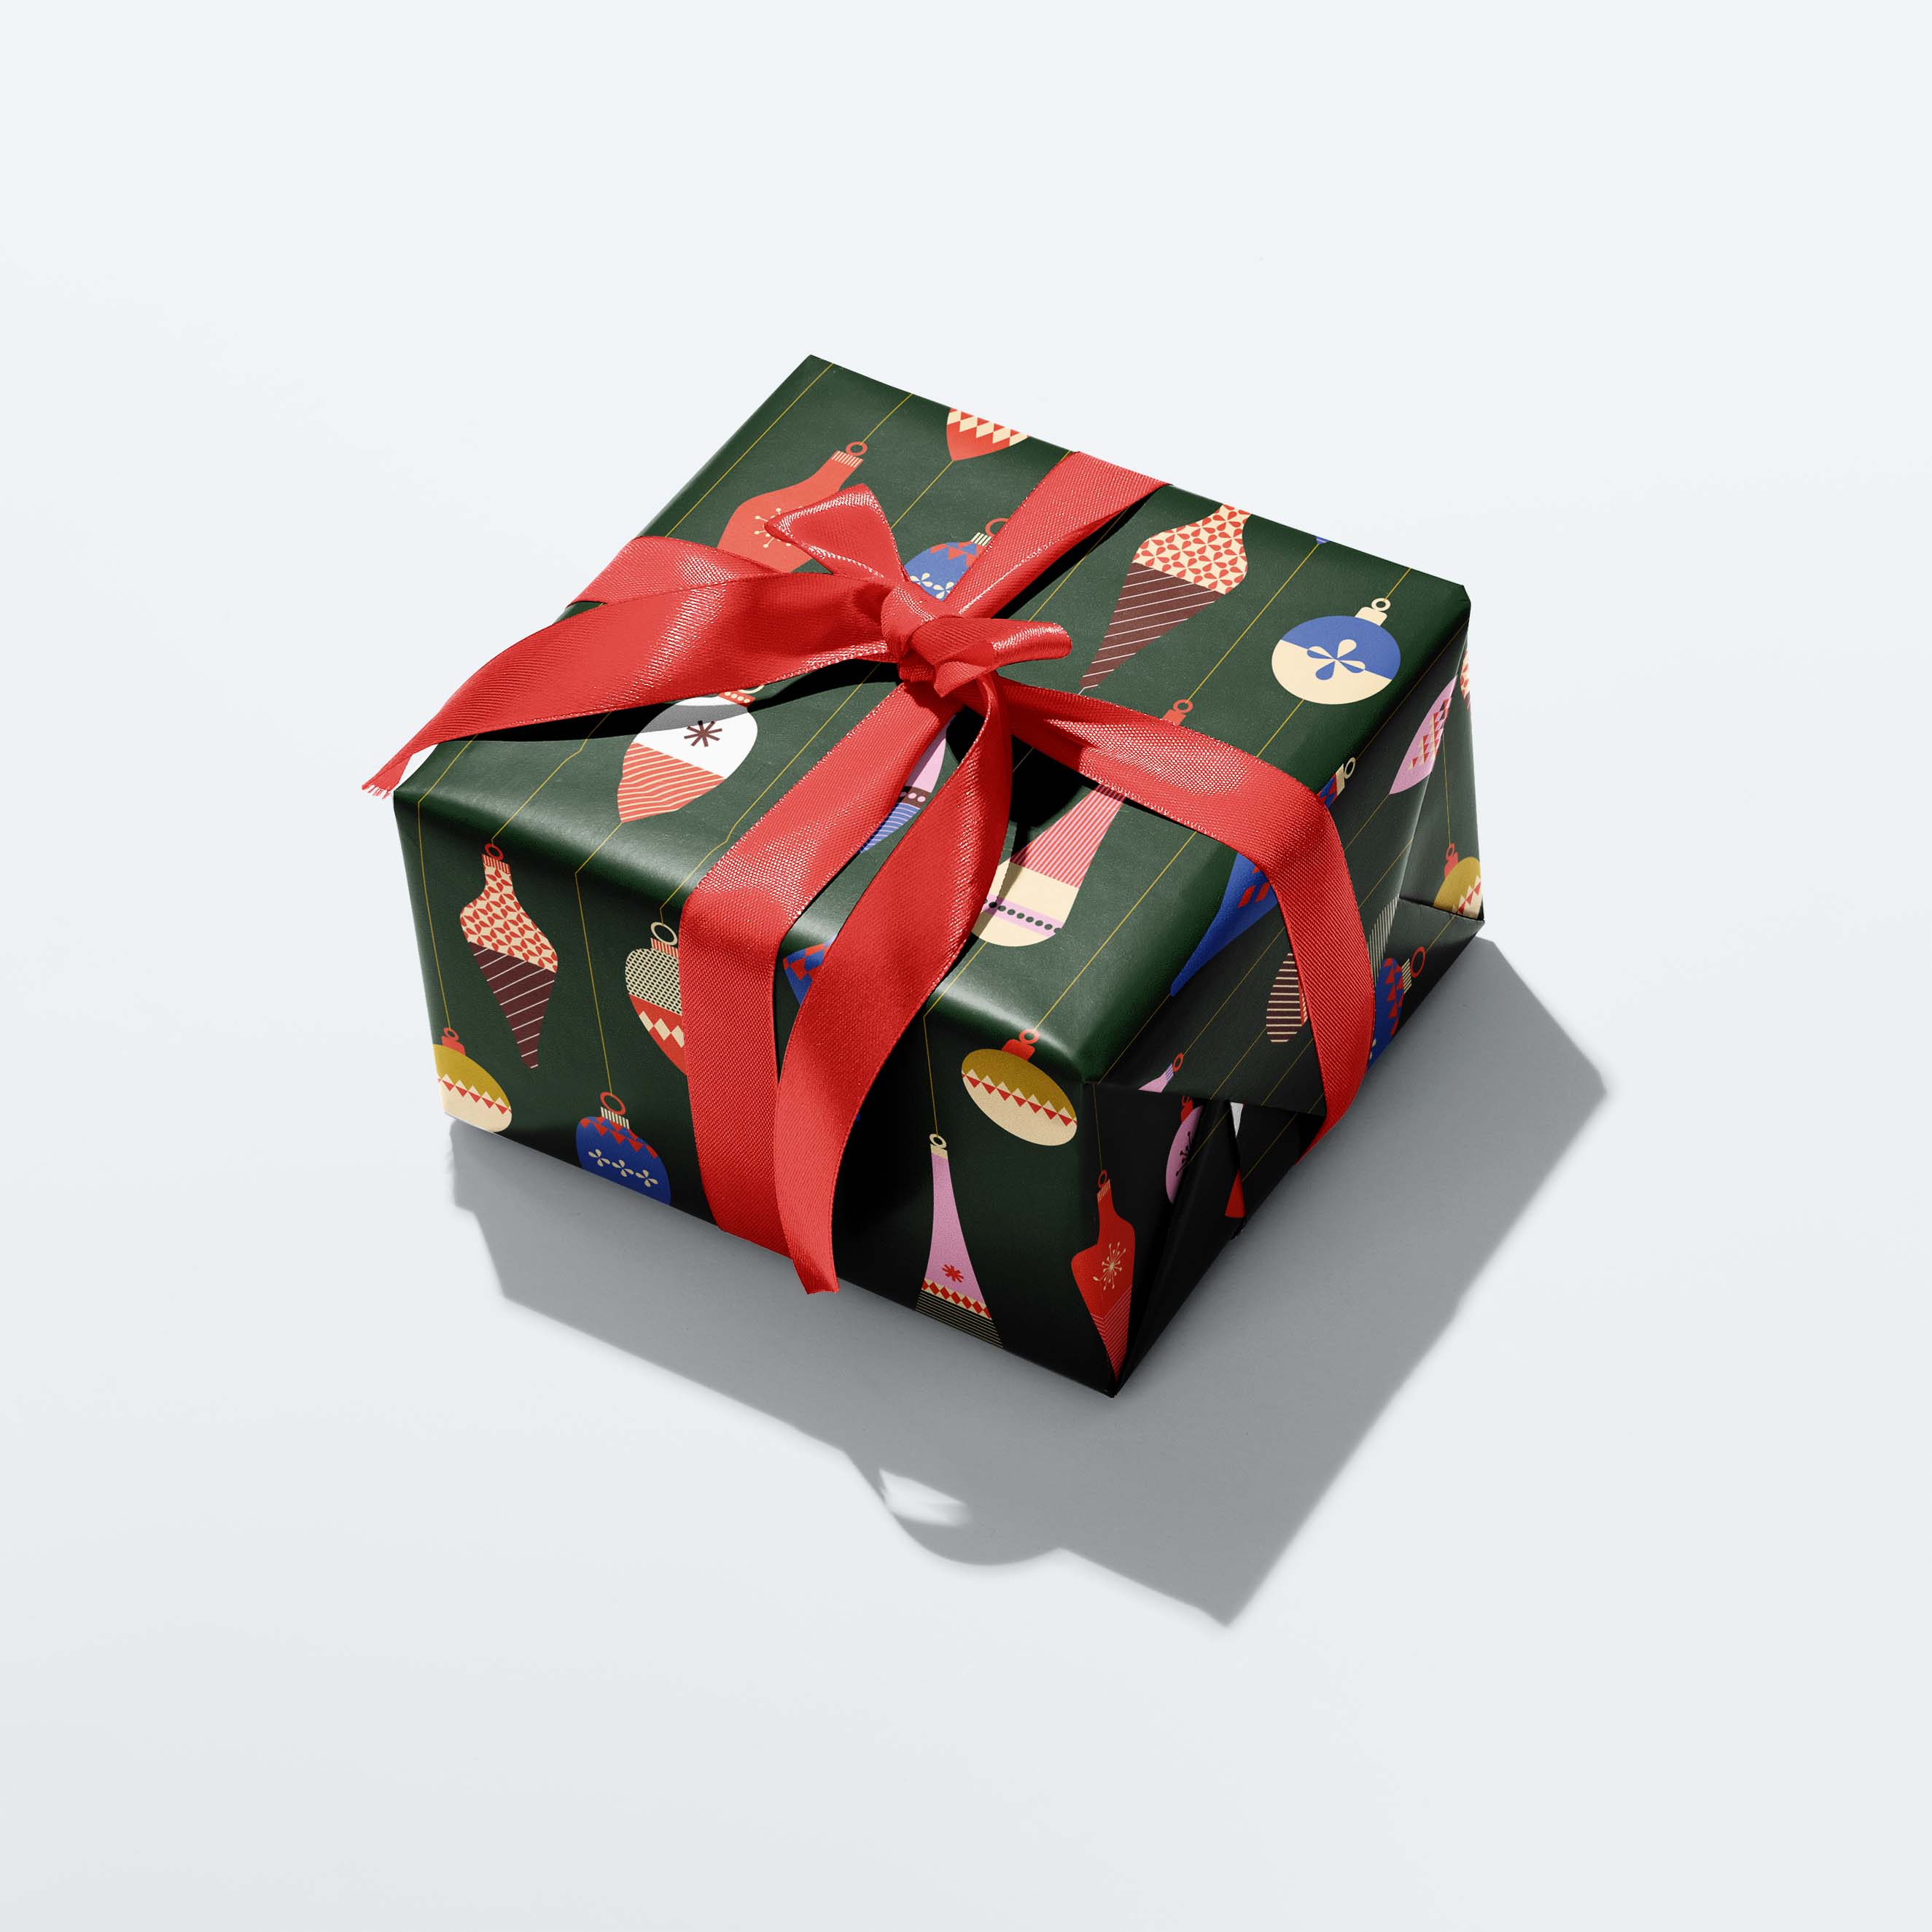 Red Ribbon Beauty Gift Wrap